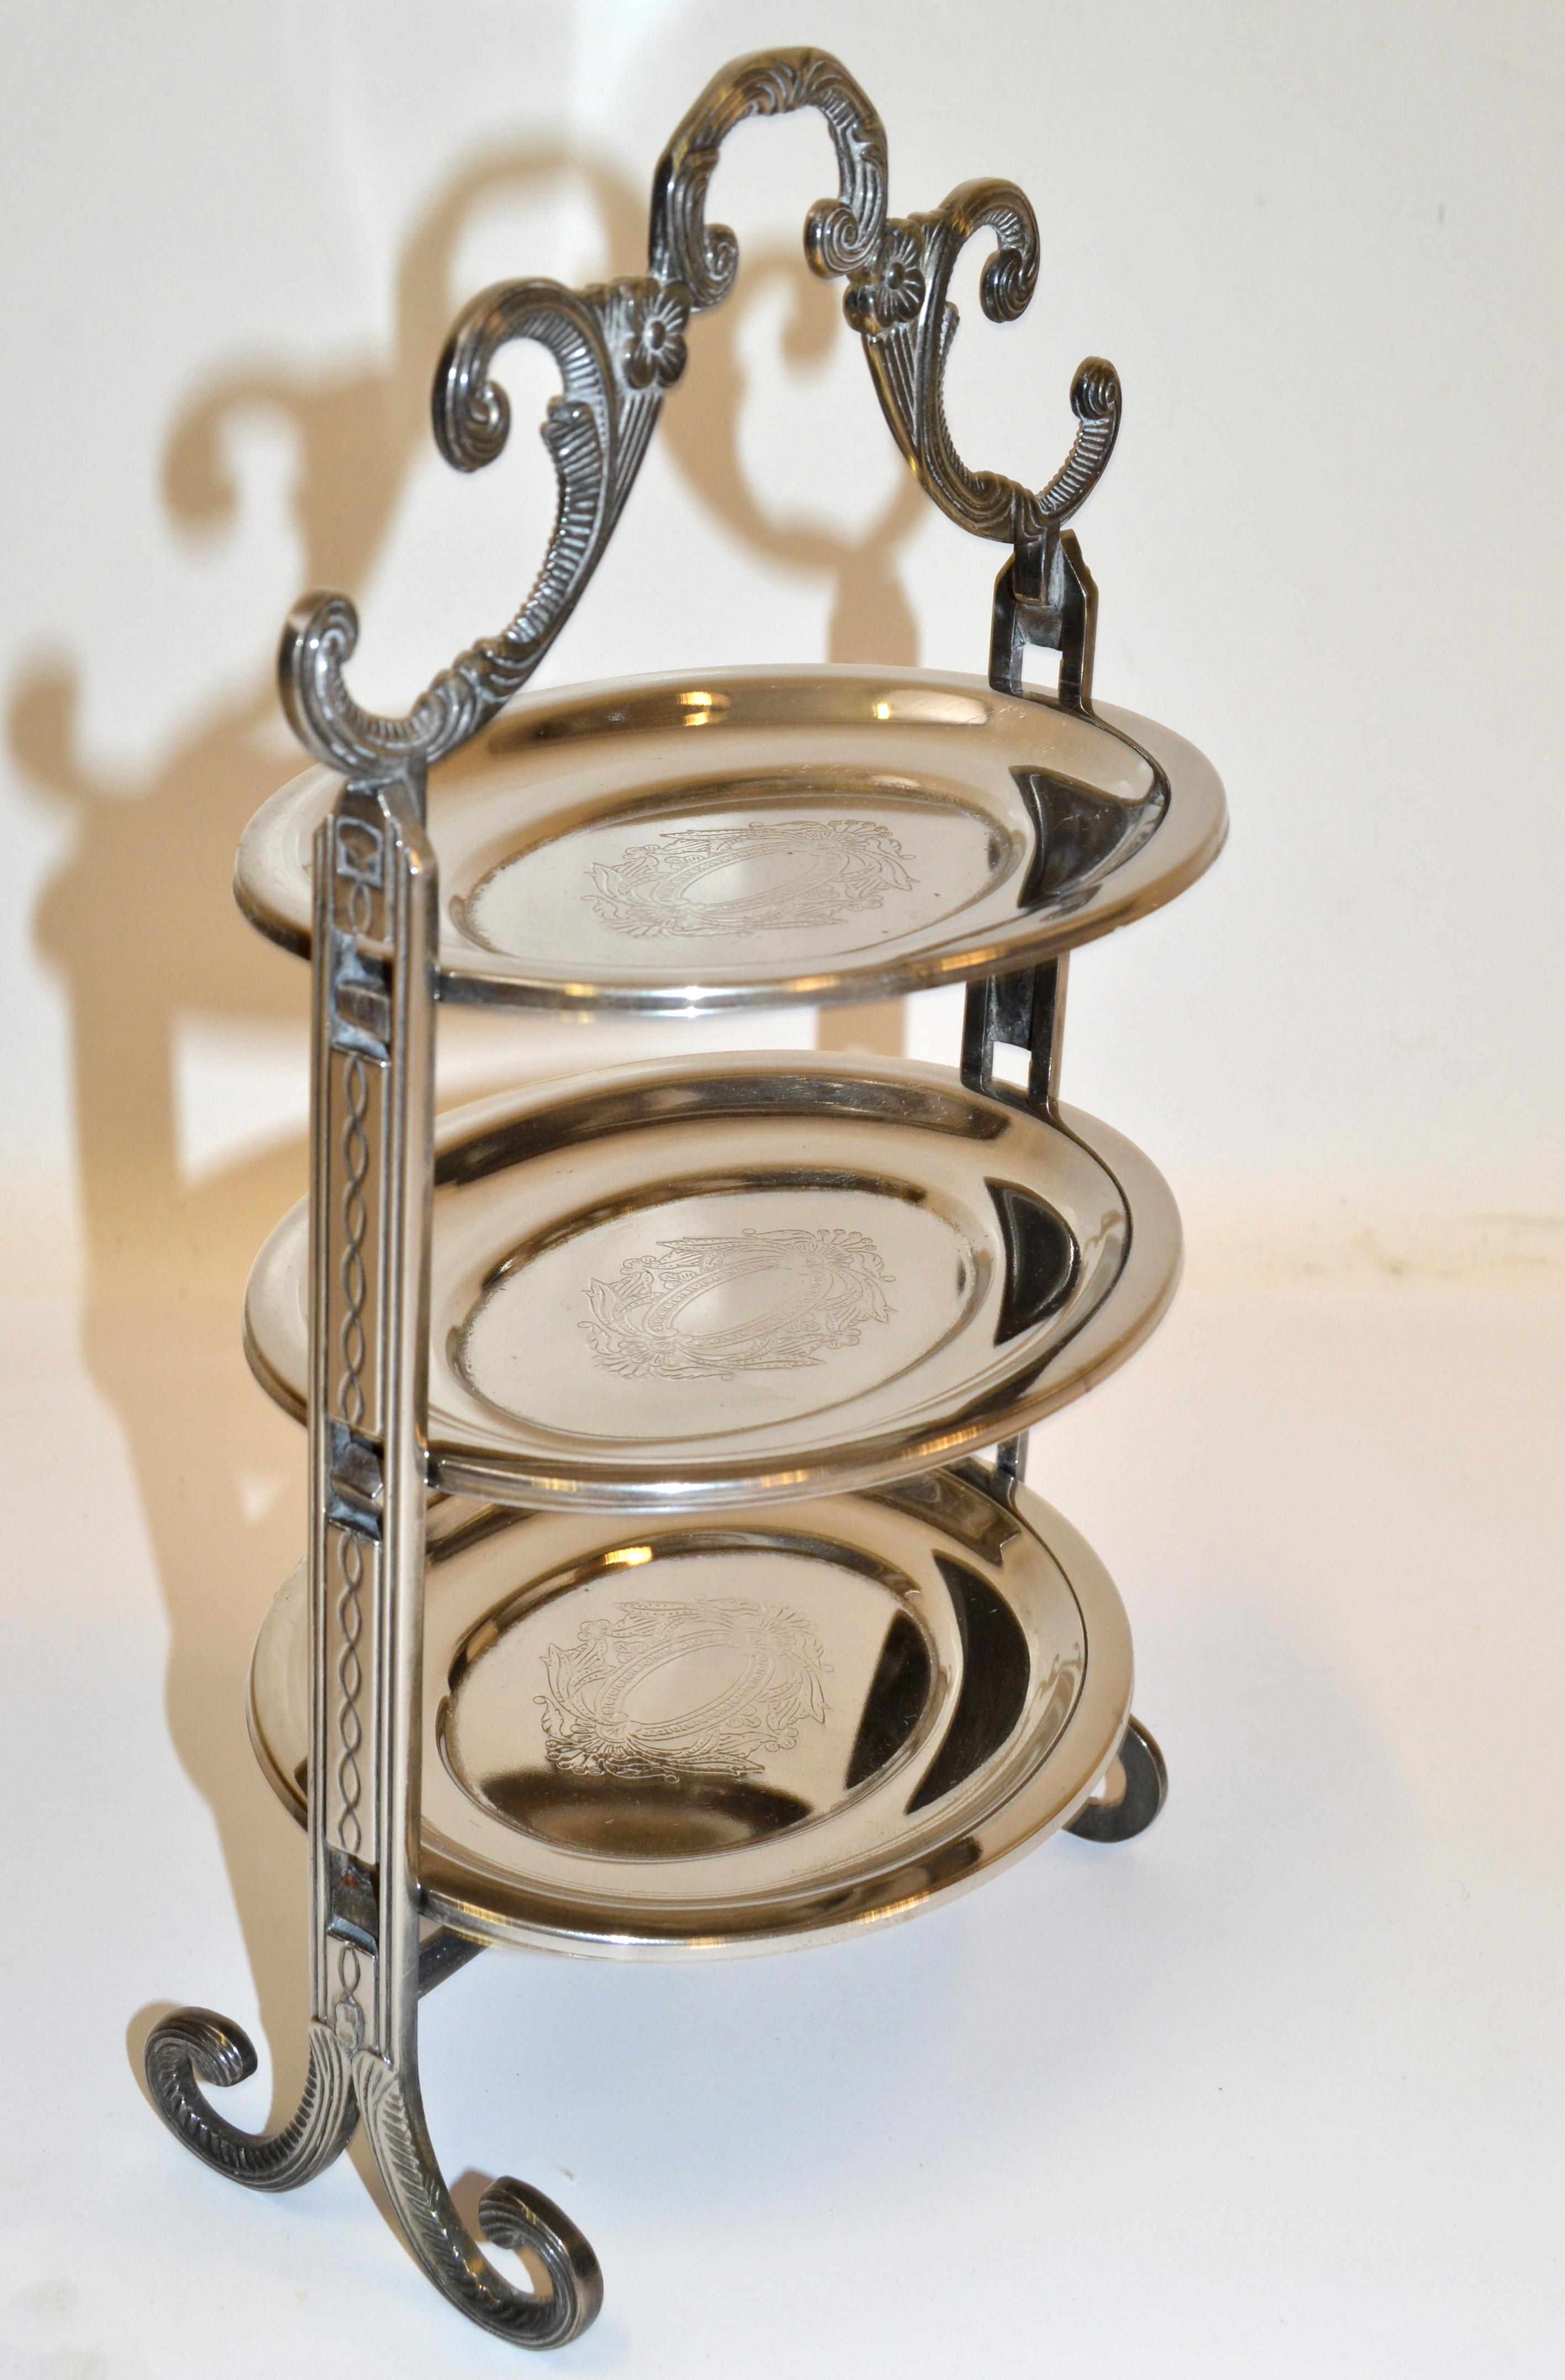 Hand-Crafted Edwardian Style Three-Tier Silver Plated Cake Stand Patisserie Stand Server Fork